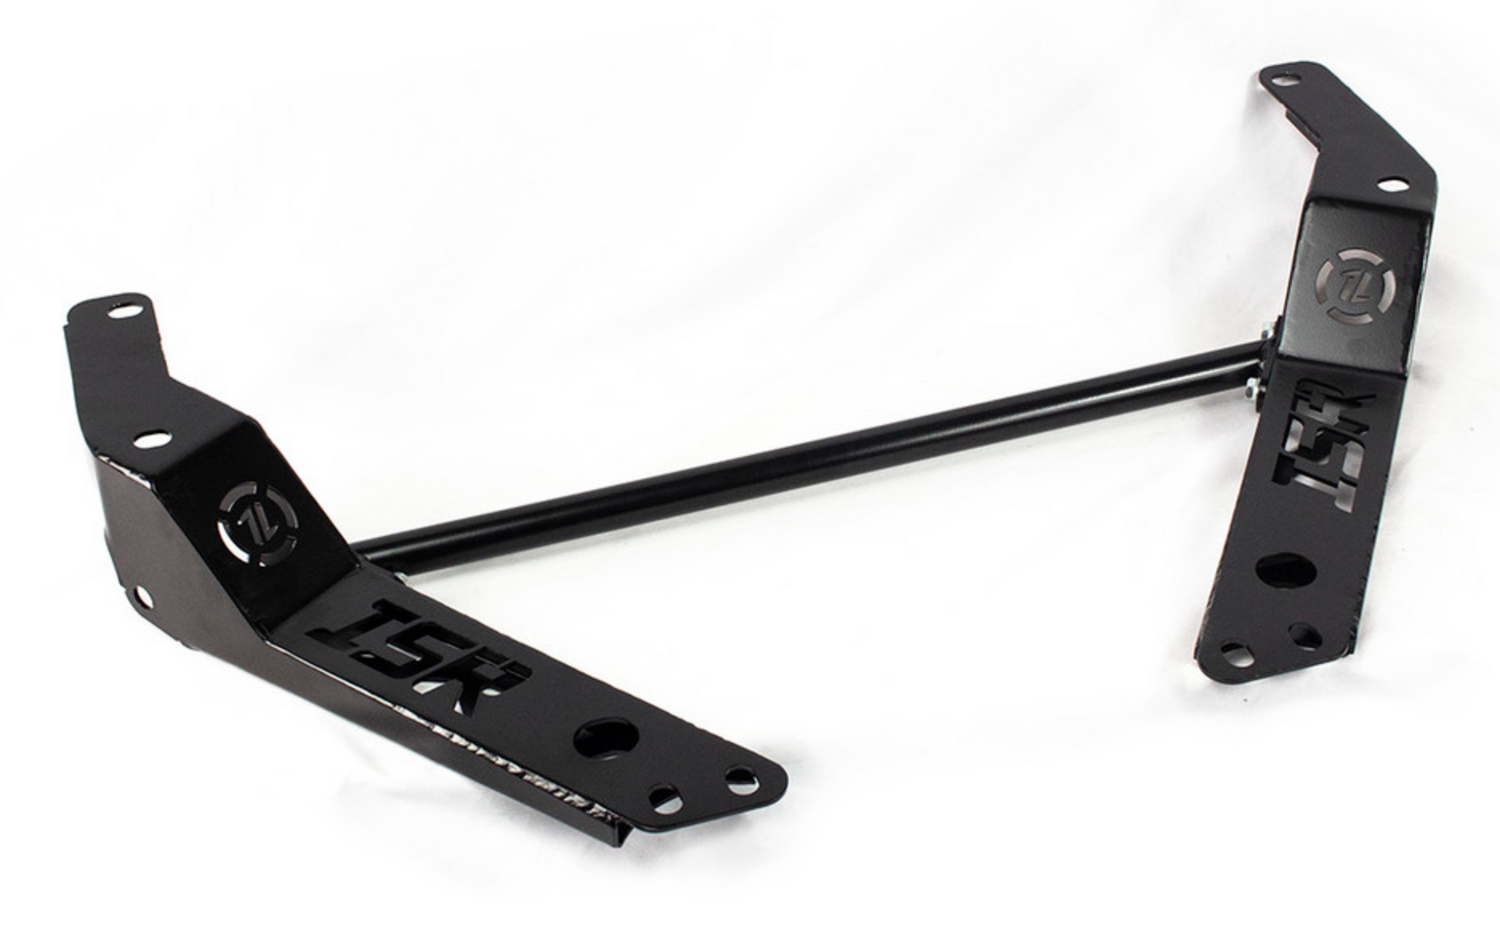 New Product Release - ISR Performance New S13 + S14 Tension Rod Braces!